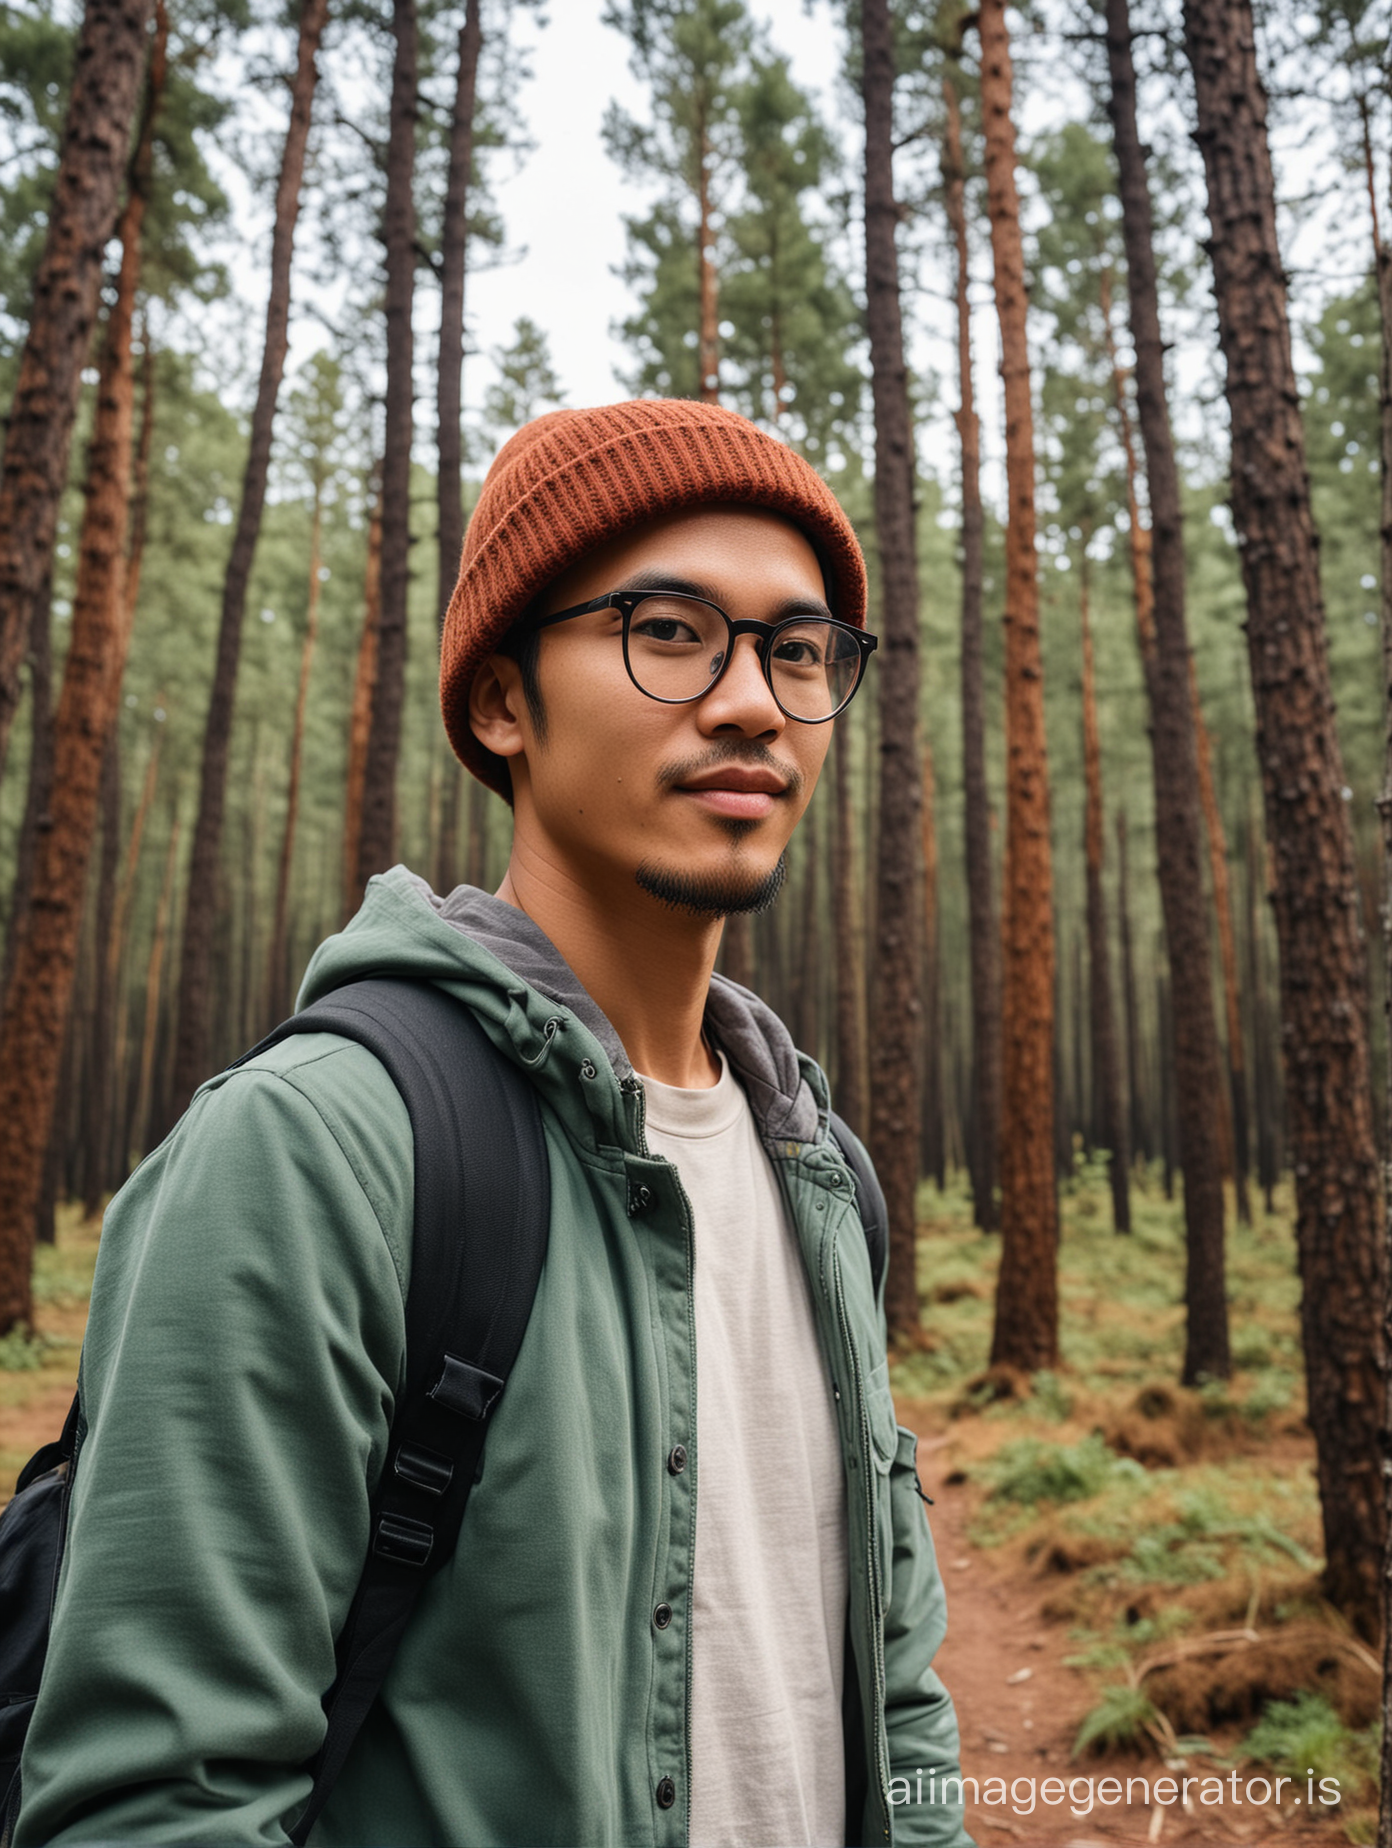 25 years old Indonesia man, wearing beanie hat, glasses, outfit traveler, standing pose, eye level angle, hiking, pine forest